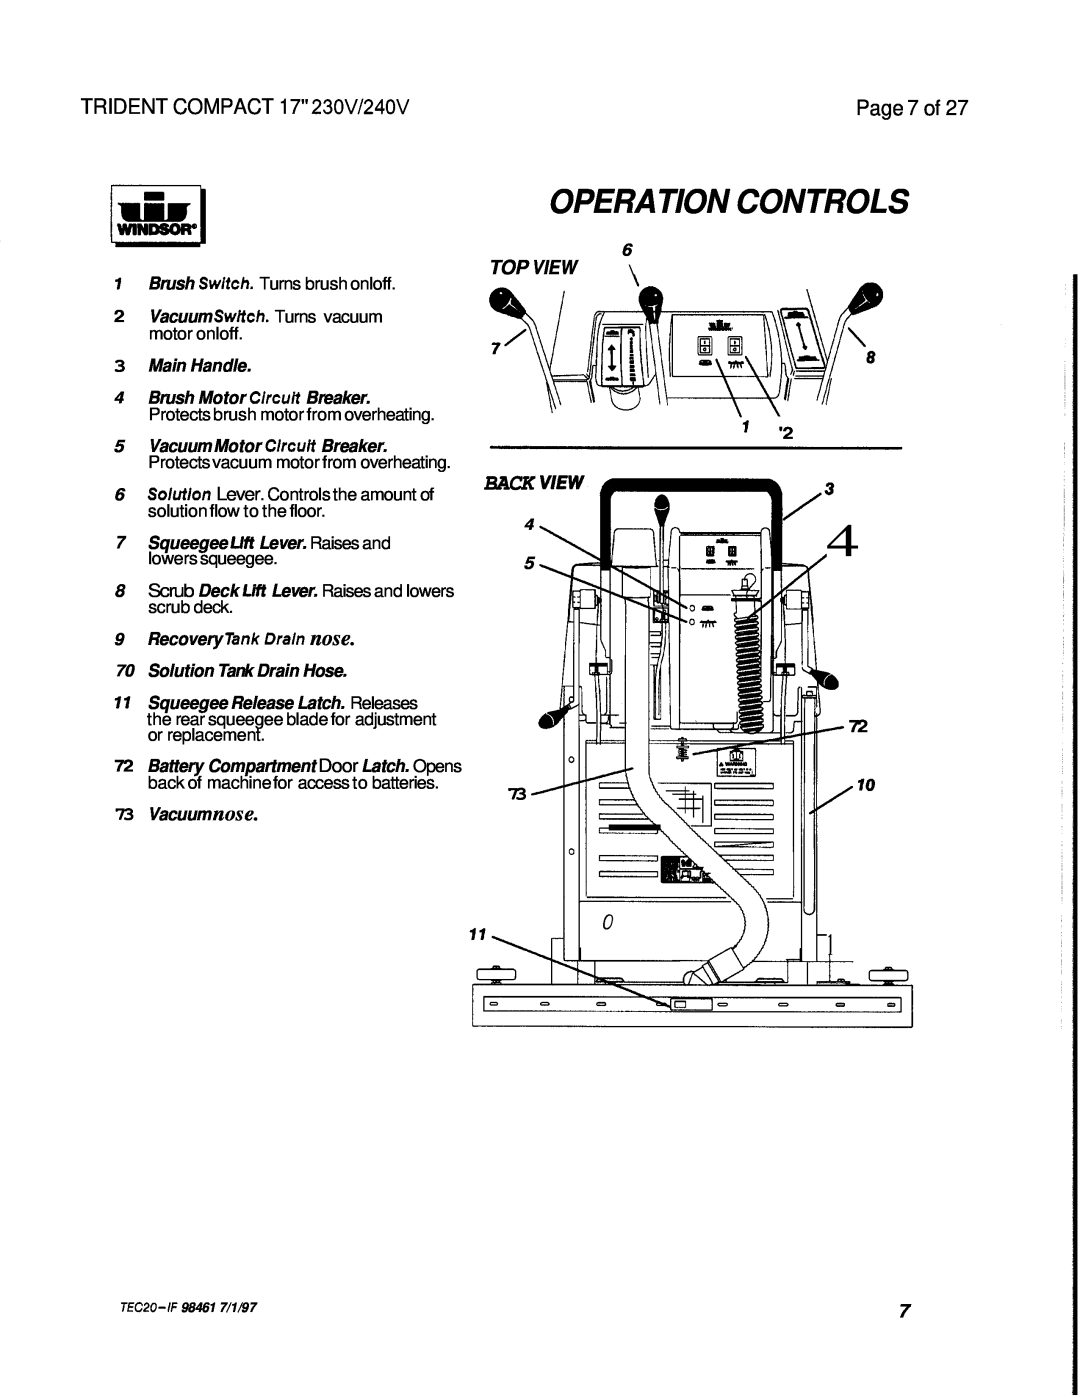 Windsor operating instructions Operation Controls, Page 7 of, Top View, ullI, Back, TRIDENT COMPACT 17 230V/240V 